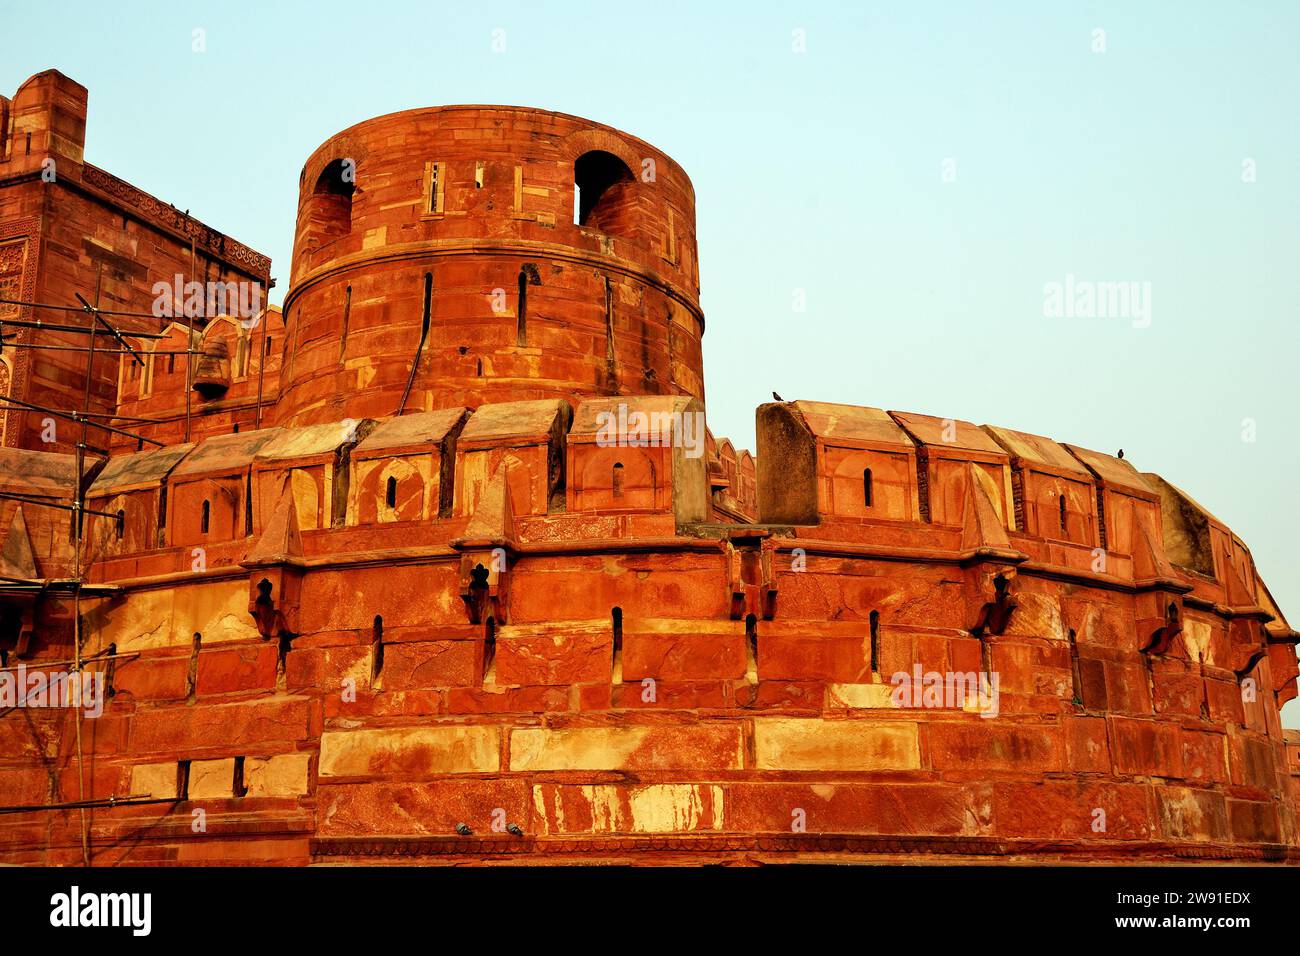 Partial View of Amar Singh Gate, Red Fort, Agra, Uttar Pradesh, India Stock Photo